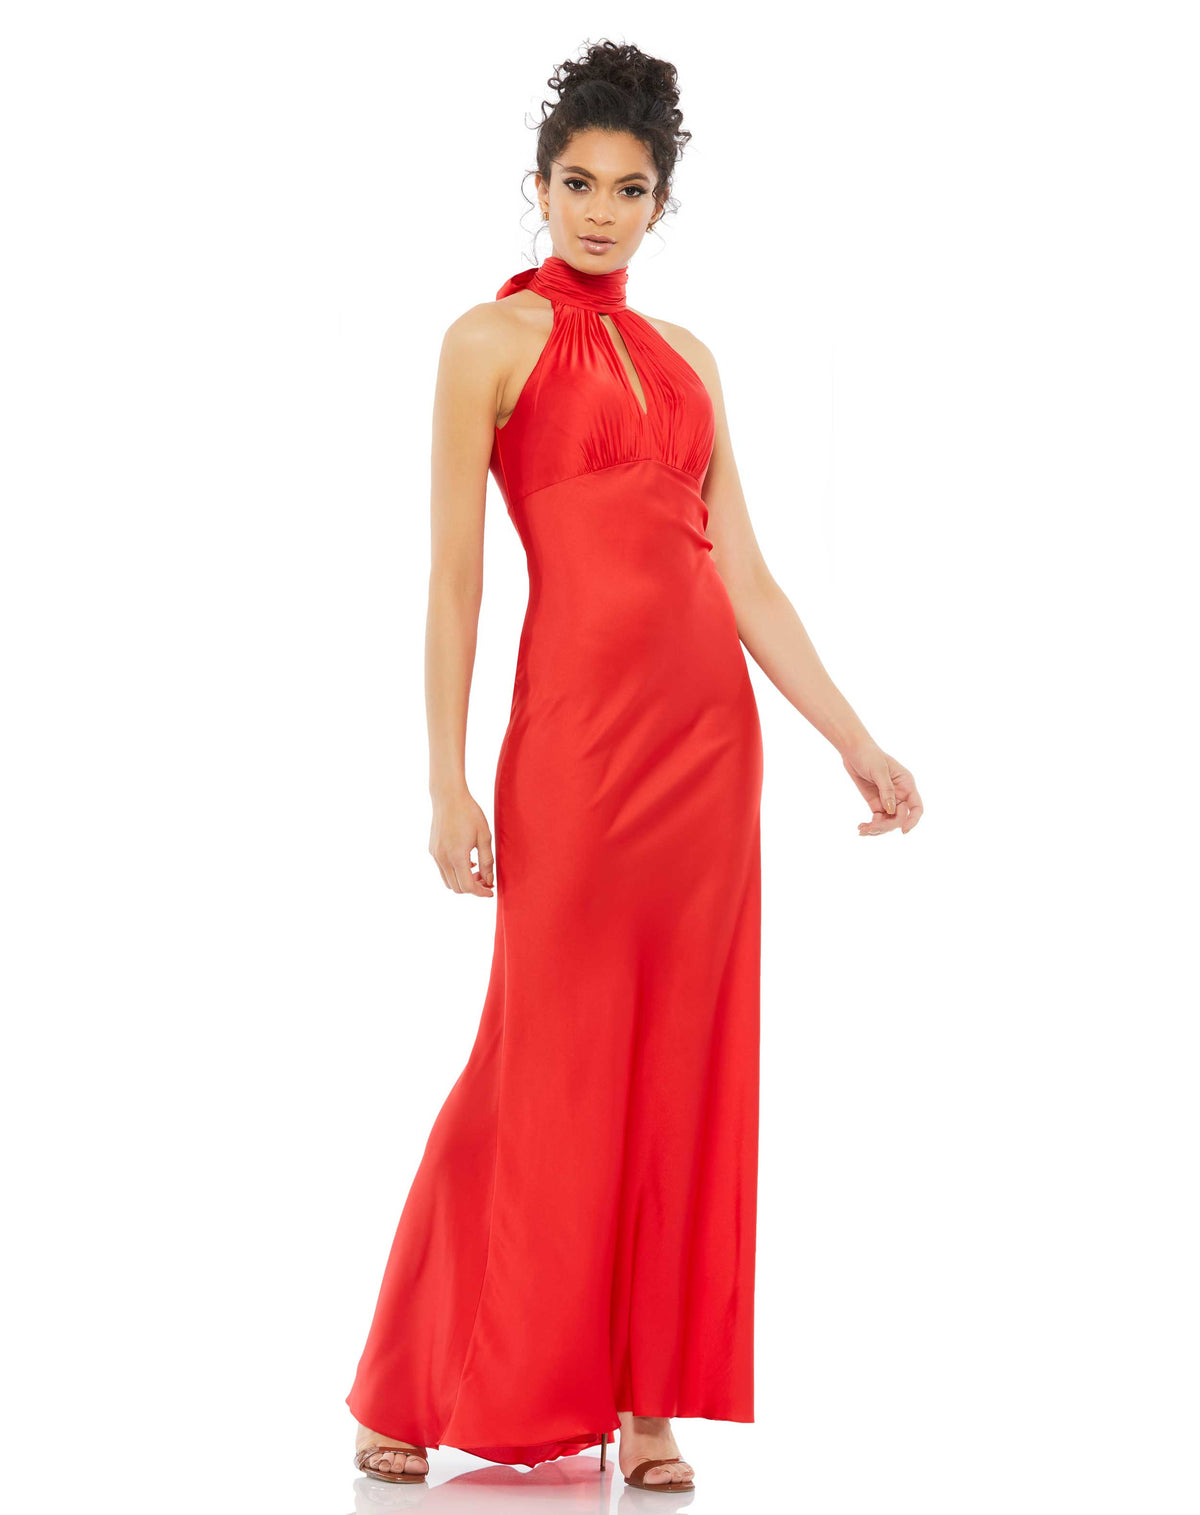 mac duggal Keyhole Halter Empire Waist Gown - White, engagement party dress, Style # 49520 red front